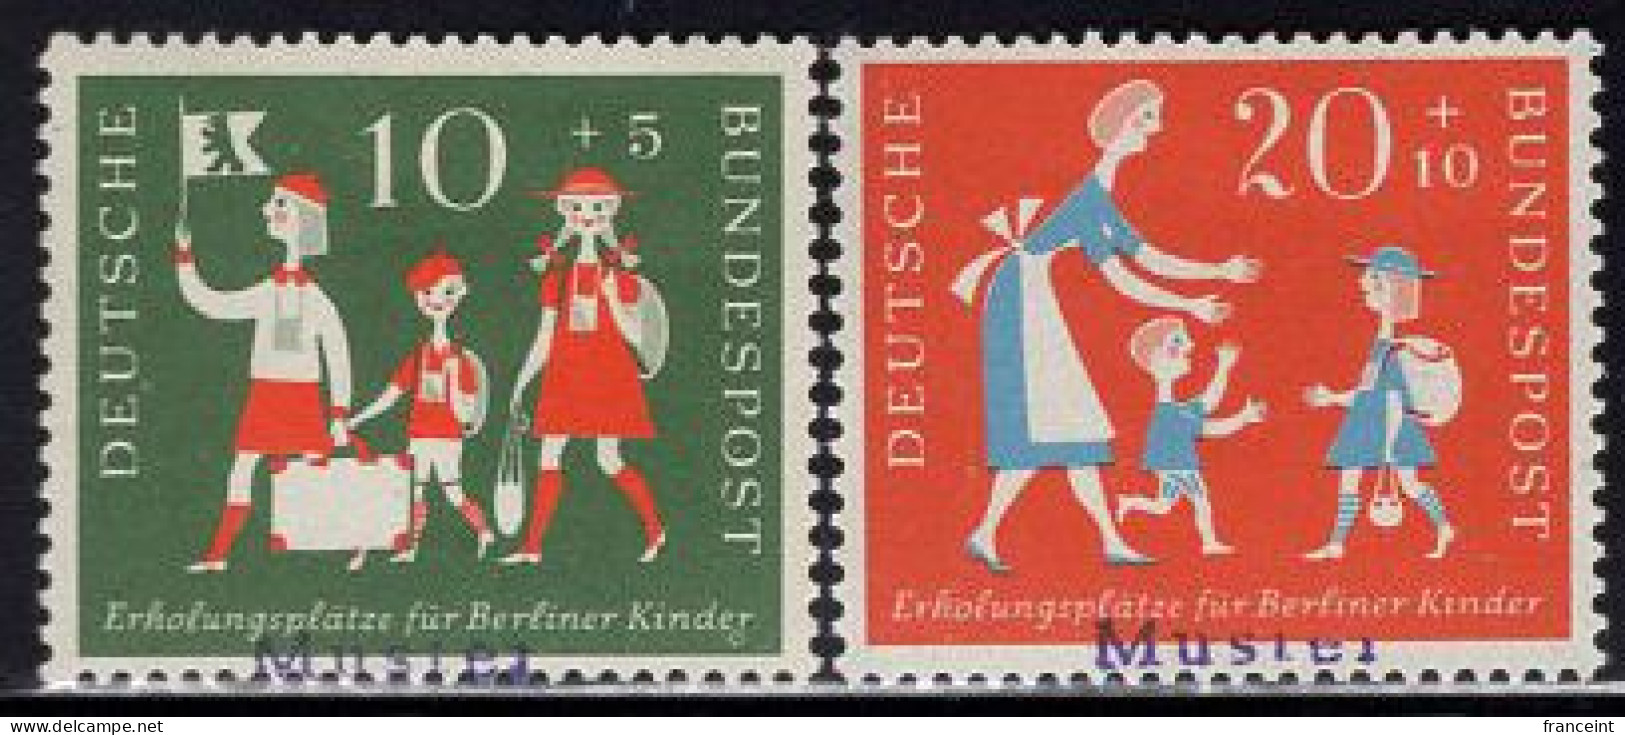 GERMANY(1957) Children Entering, Leaving Berlin. Set Of 2 With MUSTER (specimen) Overprint. Vacations For Berlin Childre - Autres & Non Classés